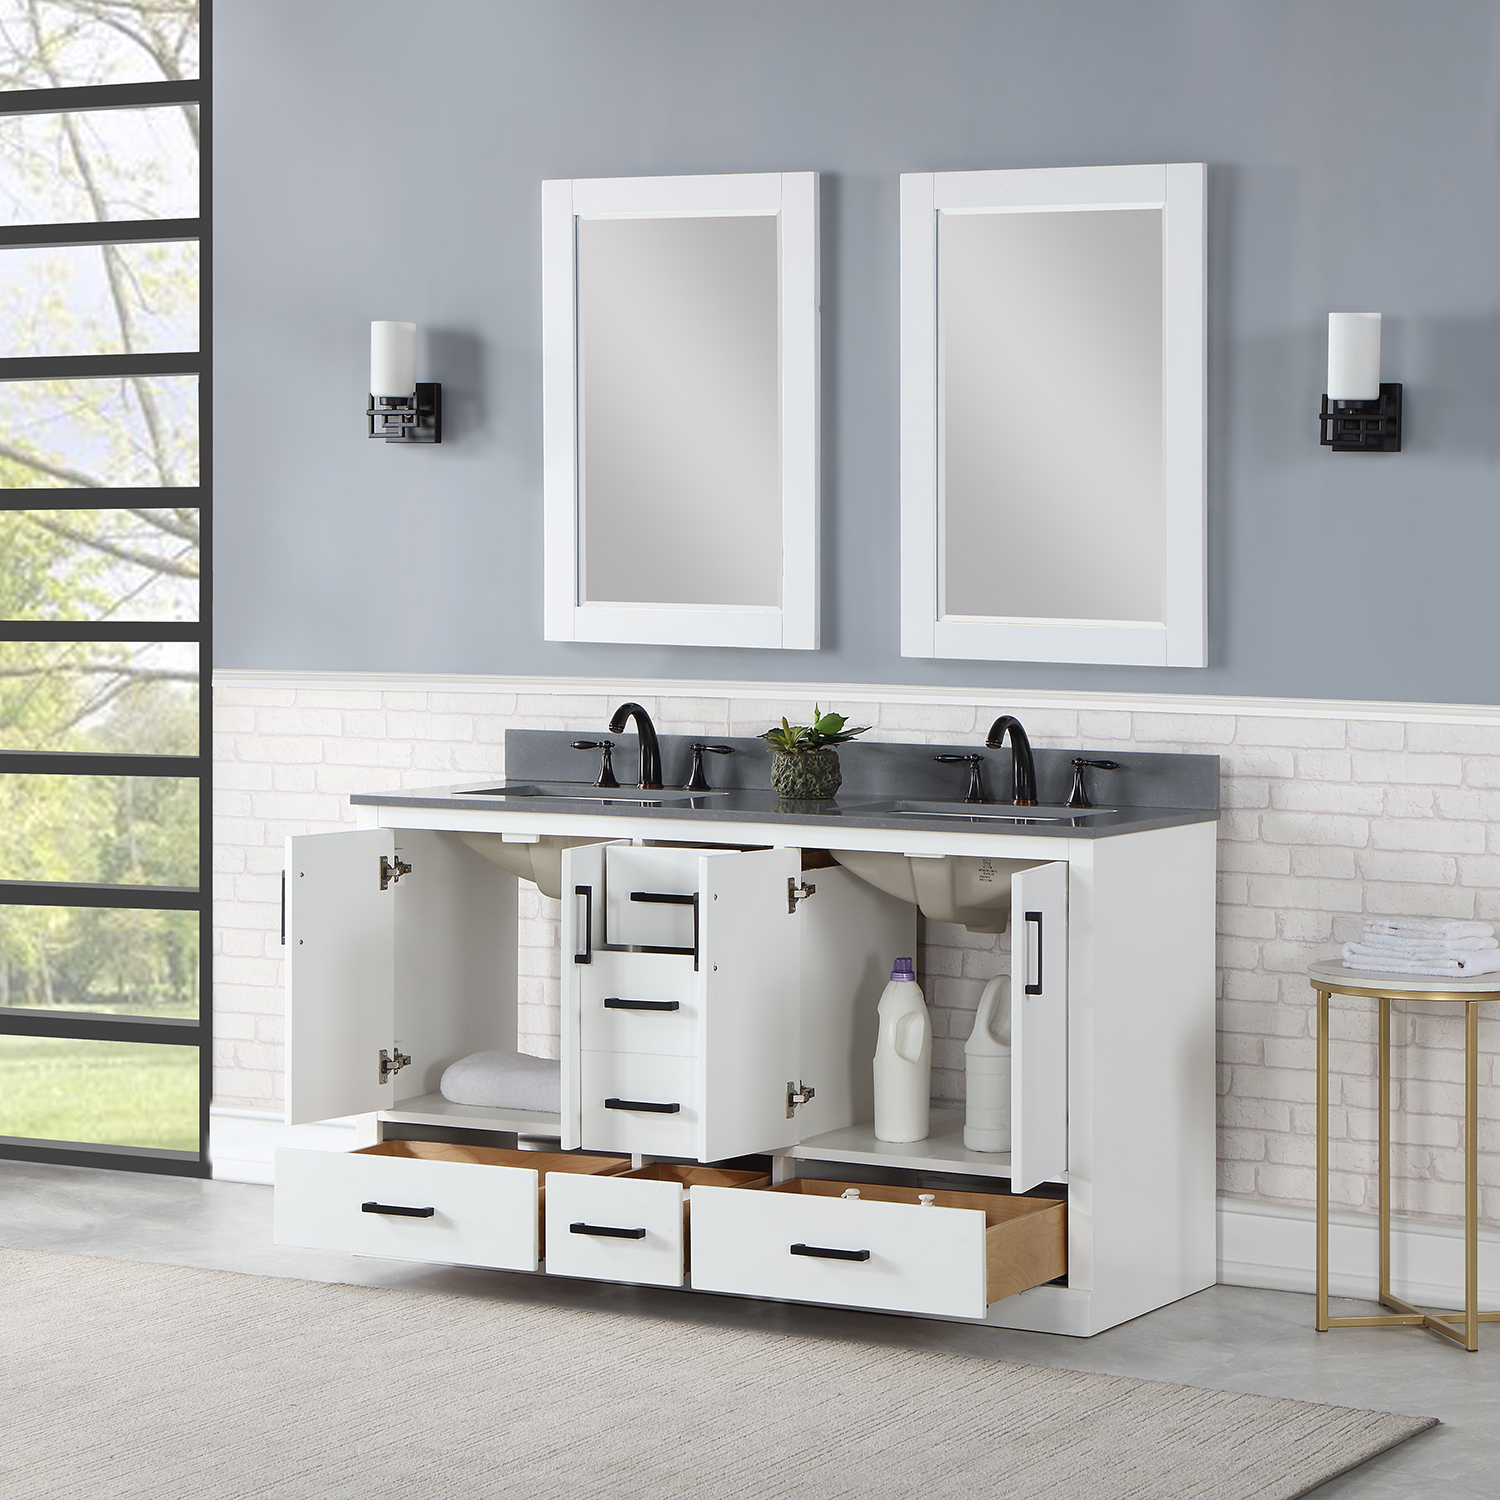  Issac Edwards Collection 60" Double Bathroom Vanity Set in White with Concrete Grey Composite Stone Countertop without Mirror